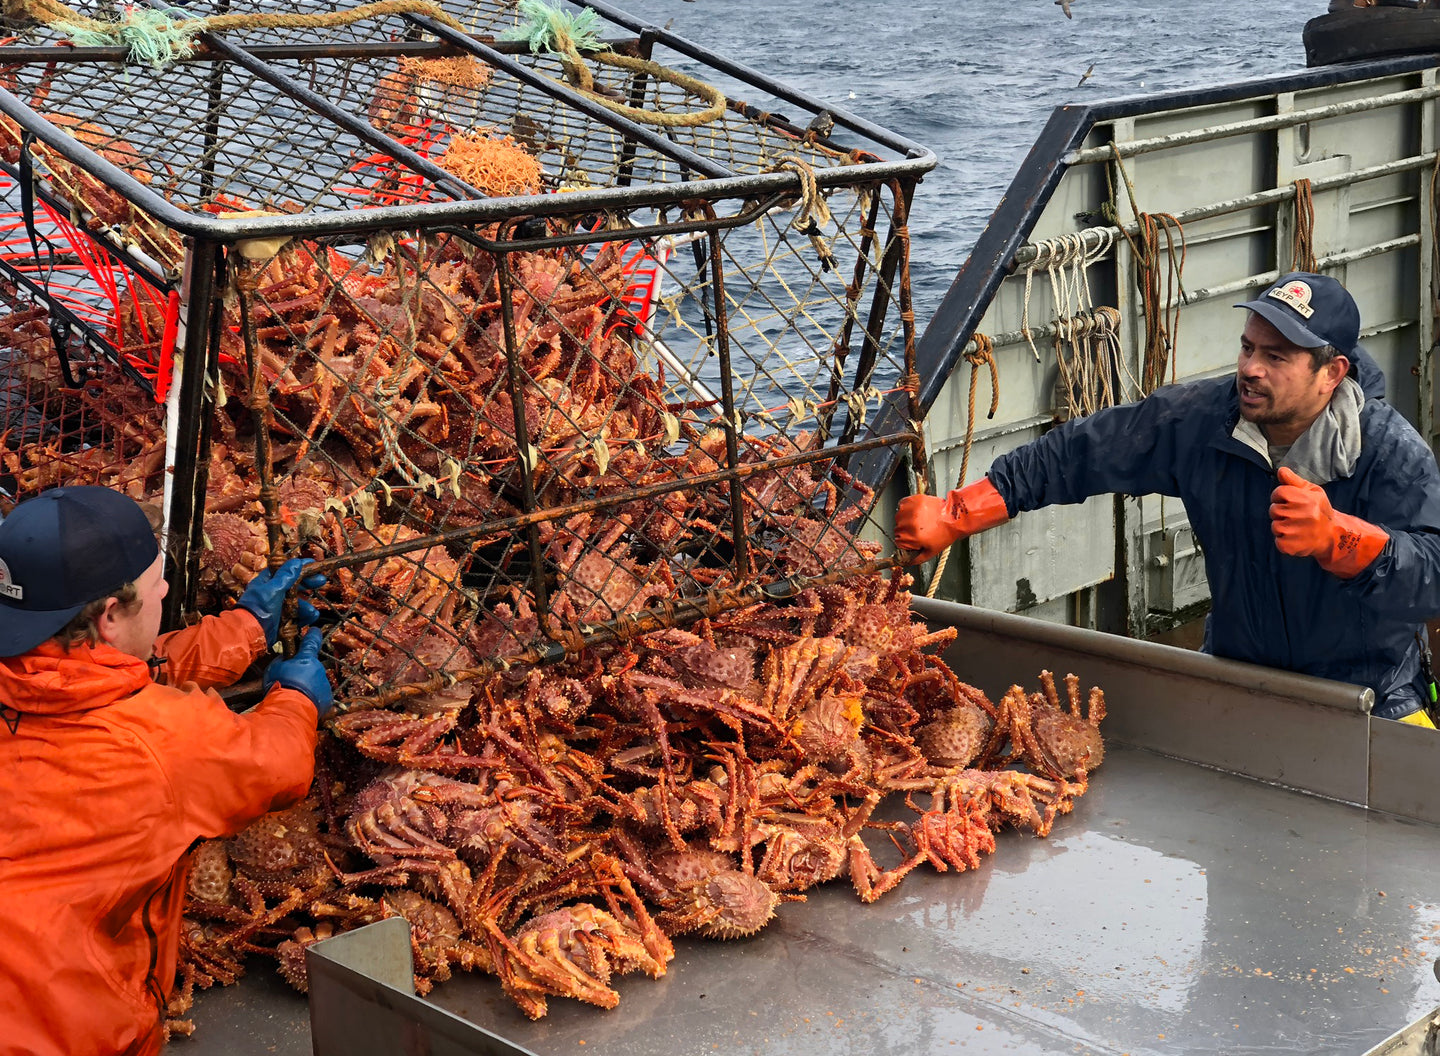 In The Alaskan Crab Boat Captains' Own Words